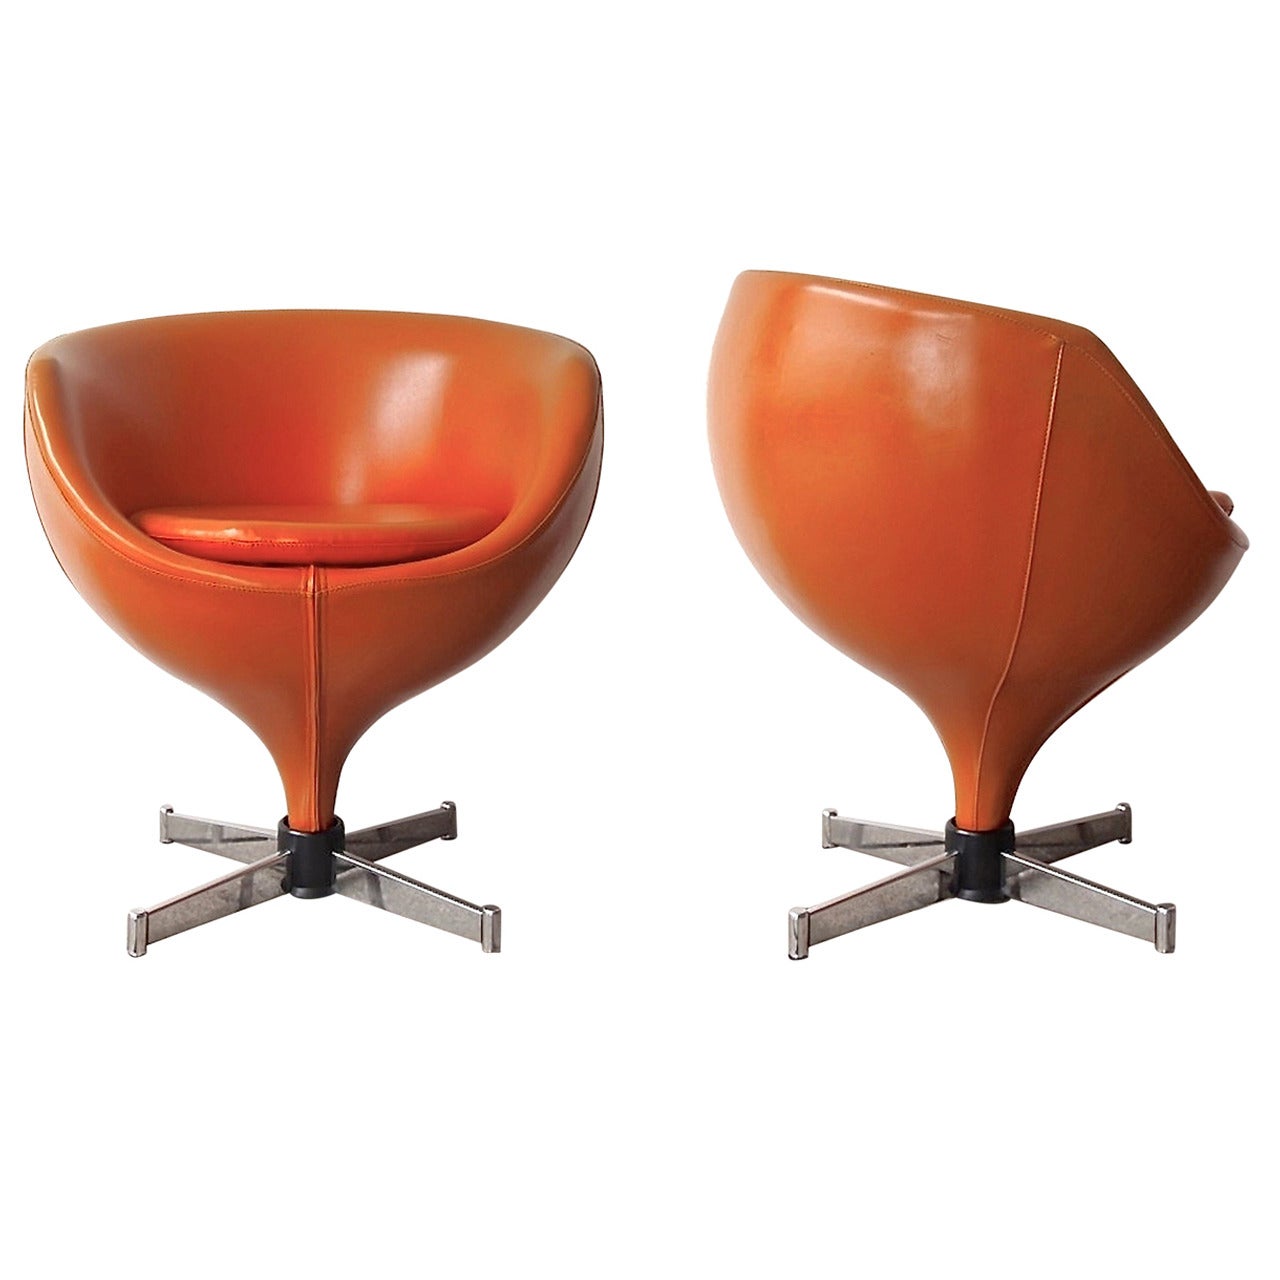 Pair of "Luna" Chairs by Pierre Guariche